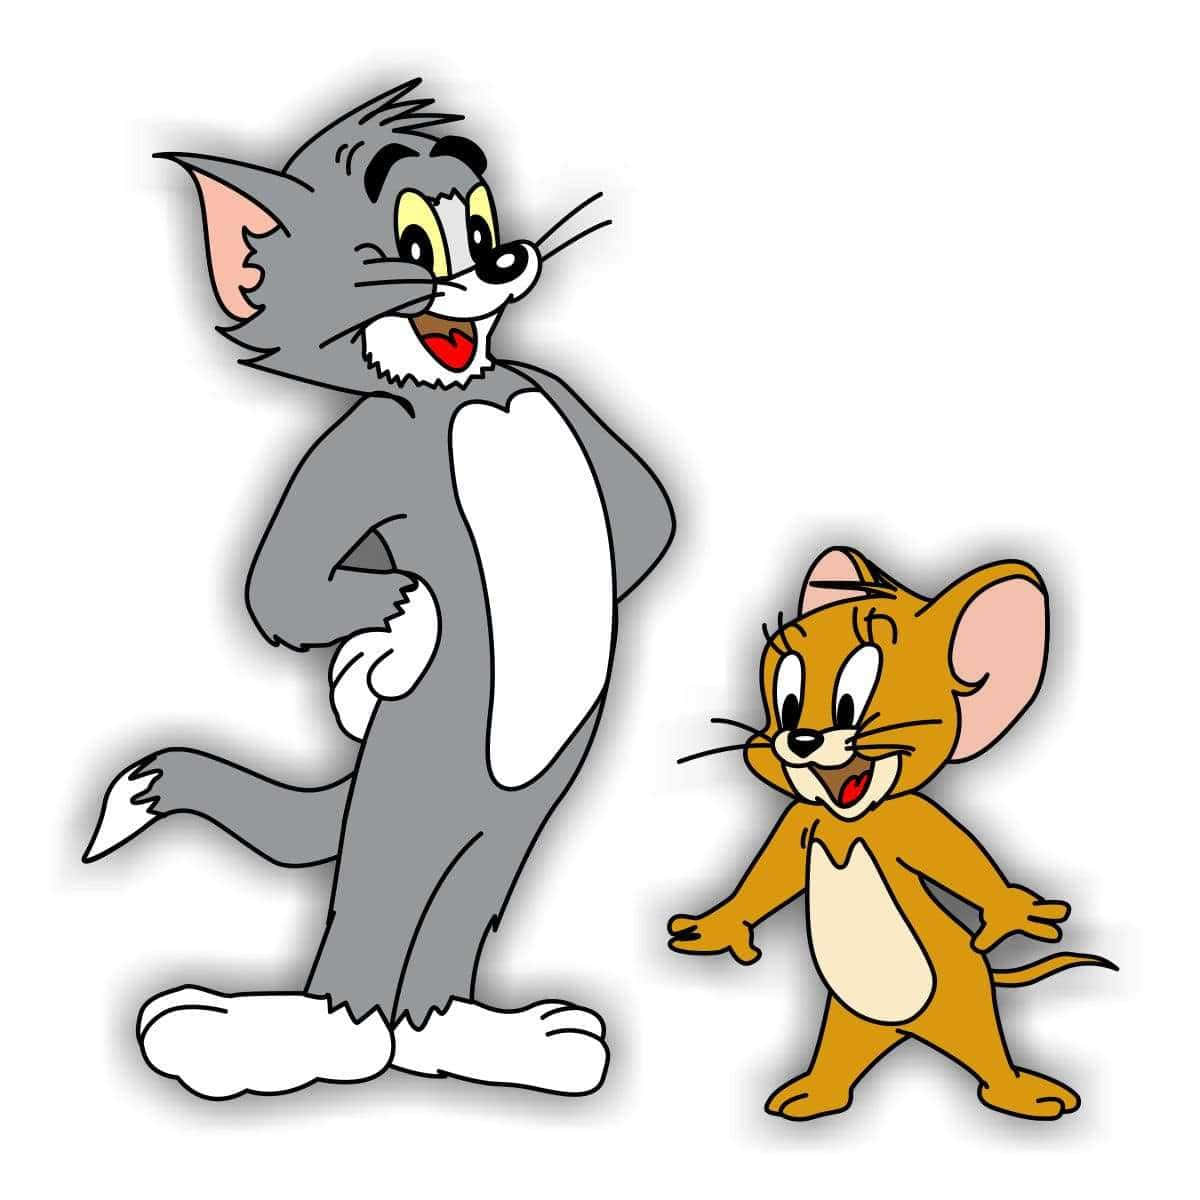 300+] Tom And Jerry Pictures | Wallpapers.com